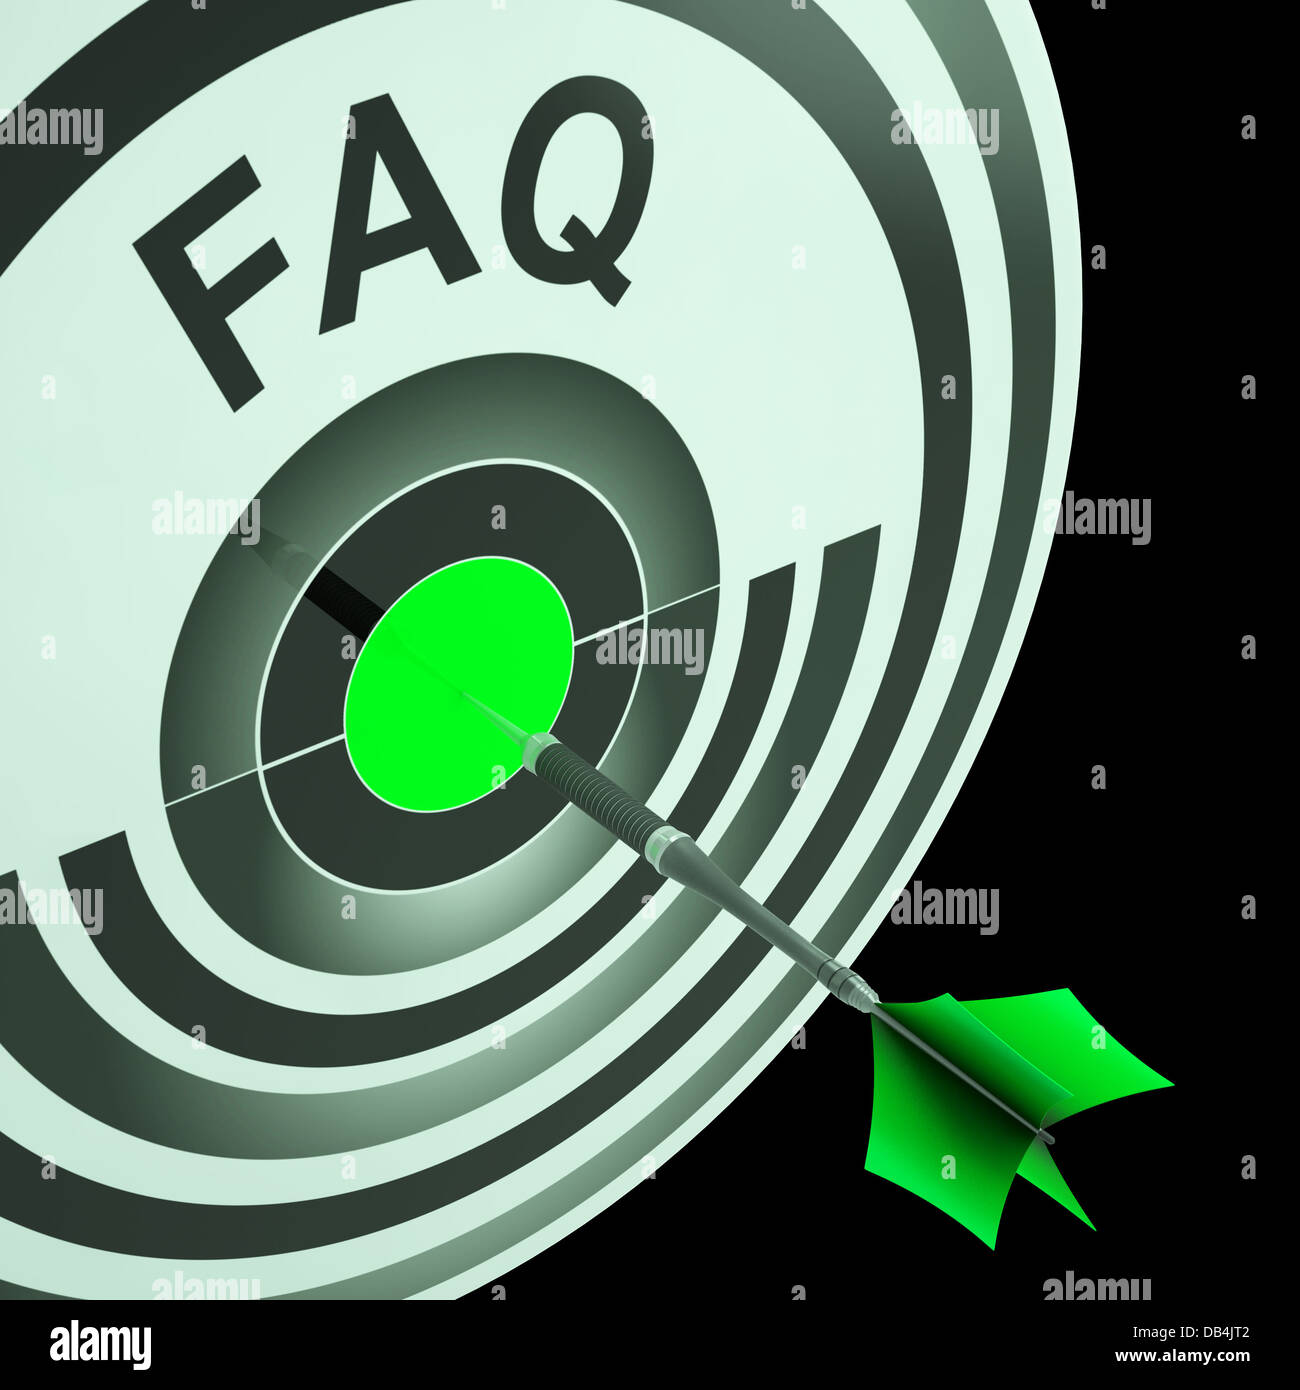 FAQ Shows Frequently Asked Questions Stock Photo